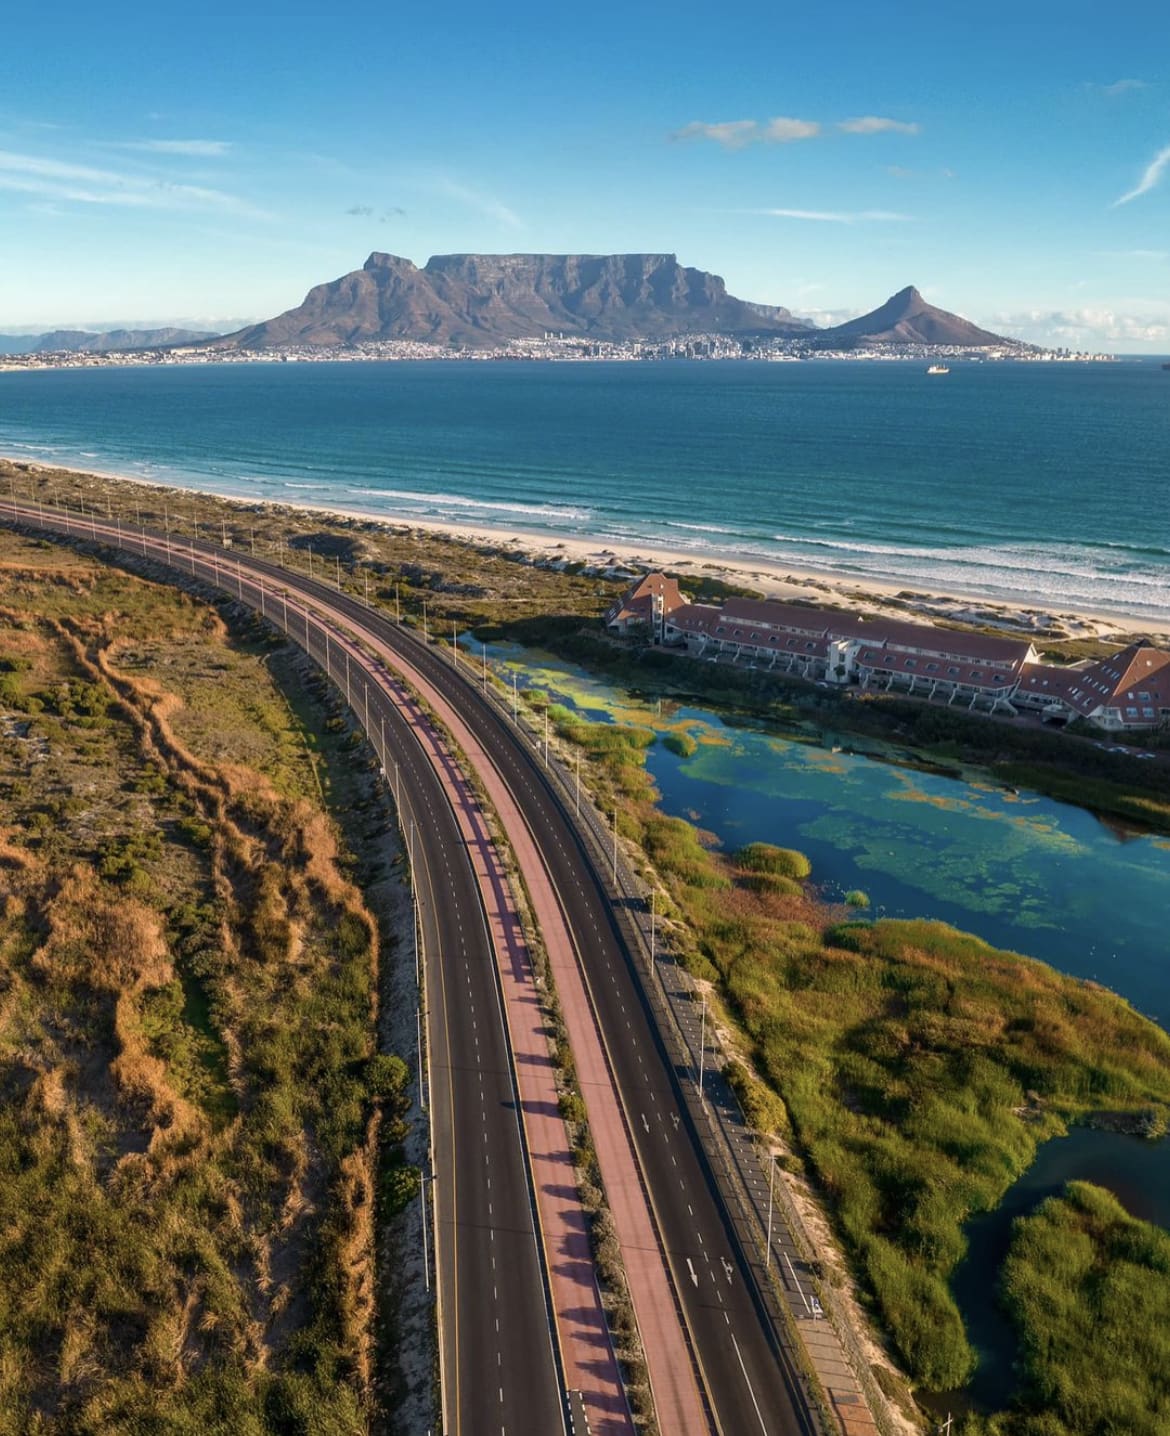 Exploring Cape Town by car